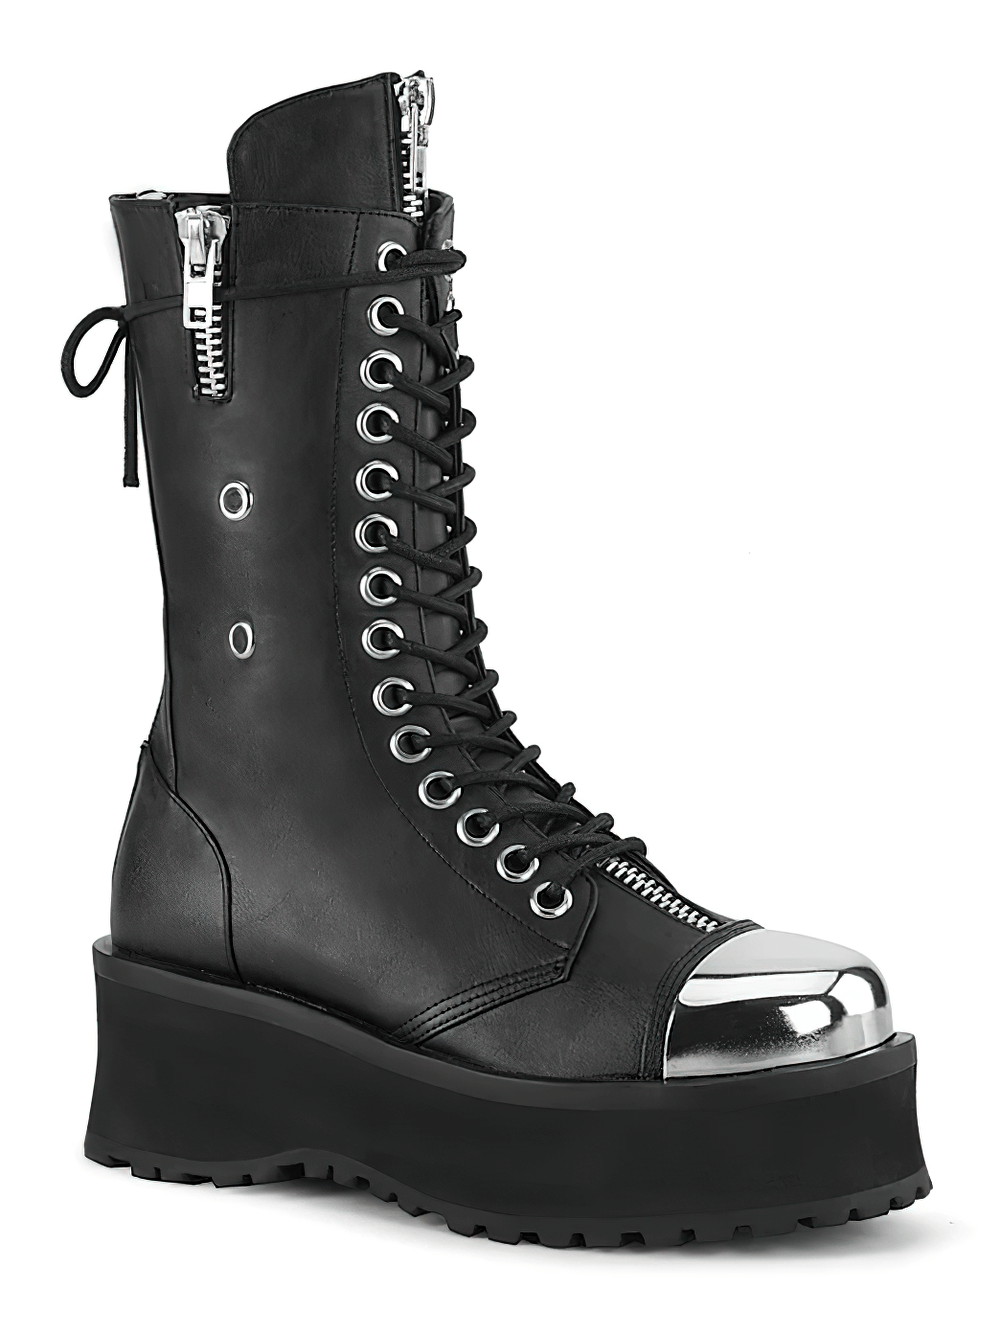 DEMONIA Edgy Mid-Calf Boots with Chrome Details and Zippers